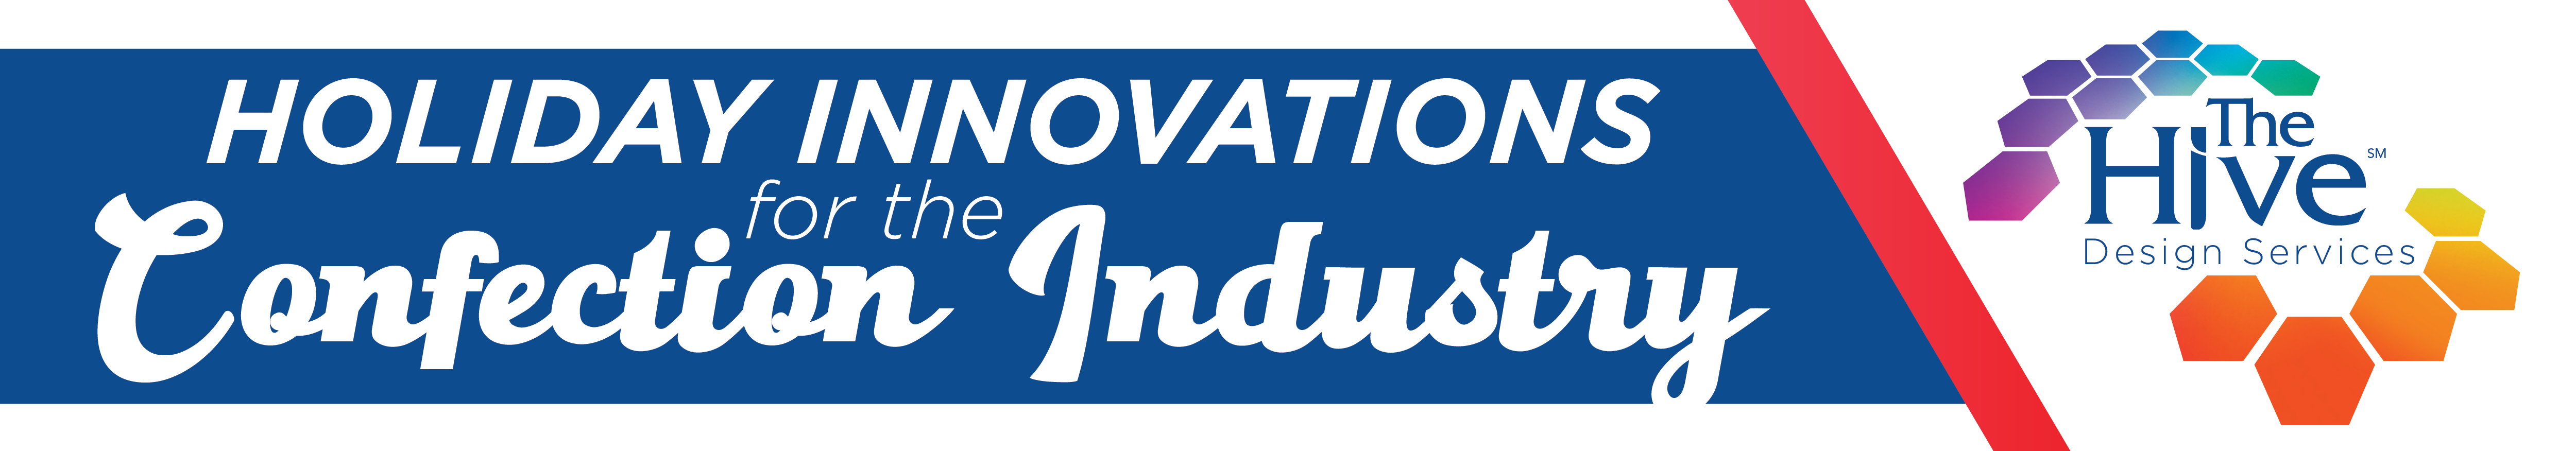 Banner that reads "Holiday Innovations for the Confections Industry" with a The Hive Design Services logo